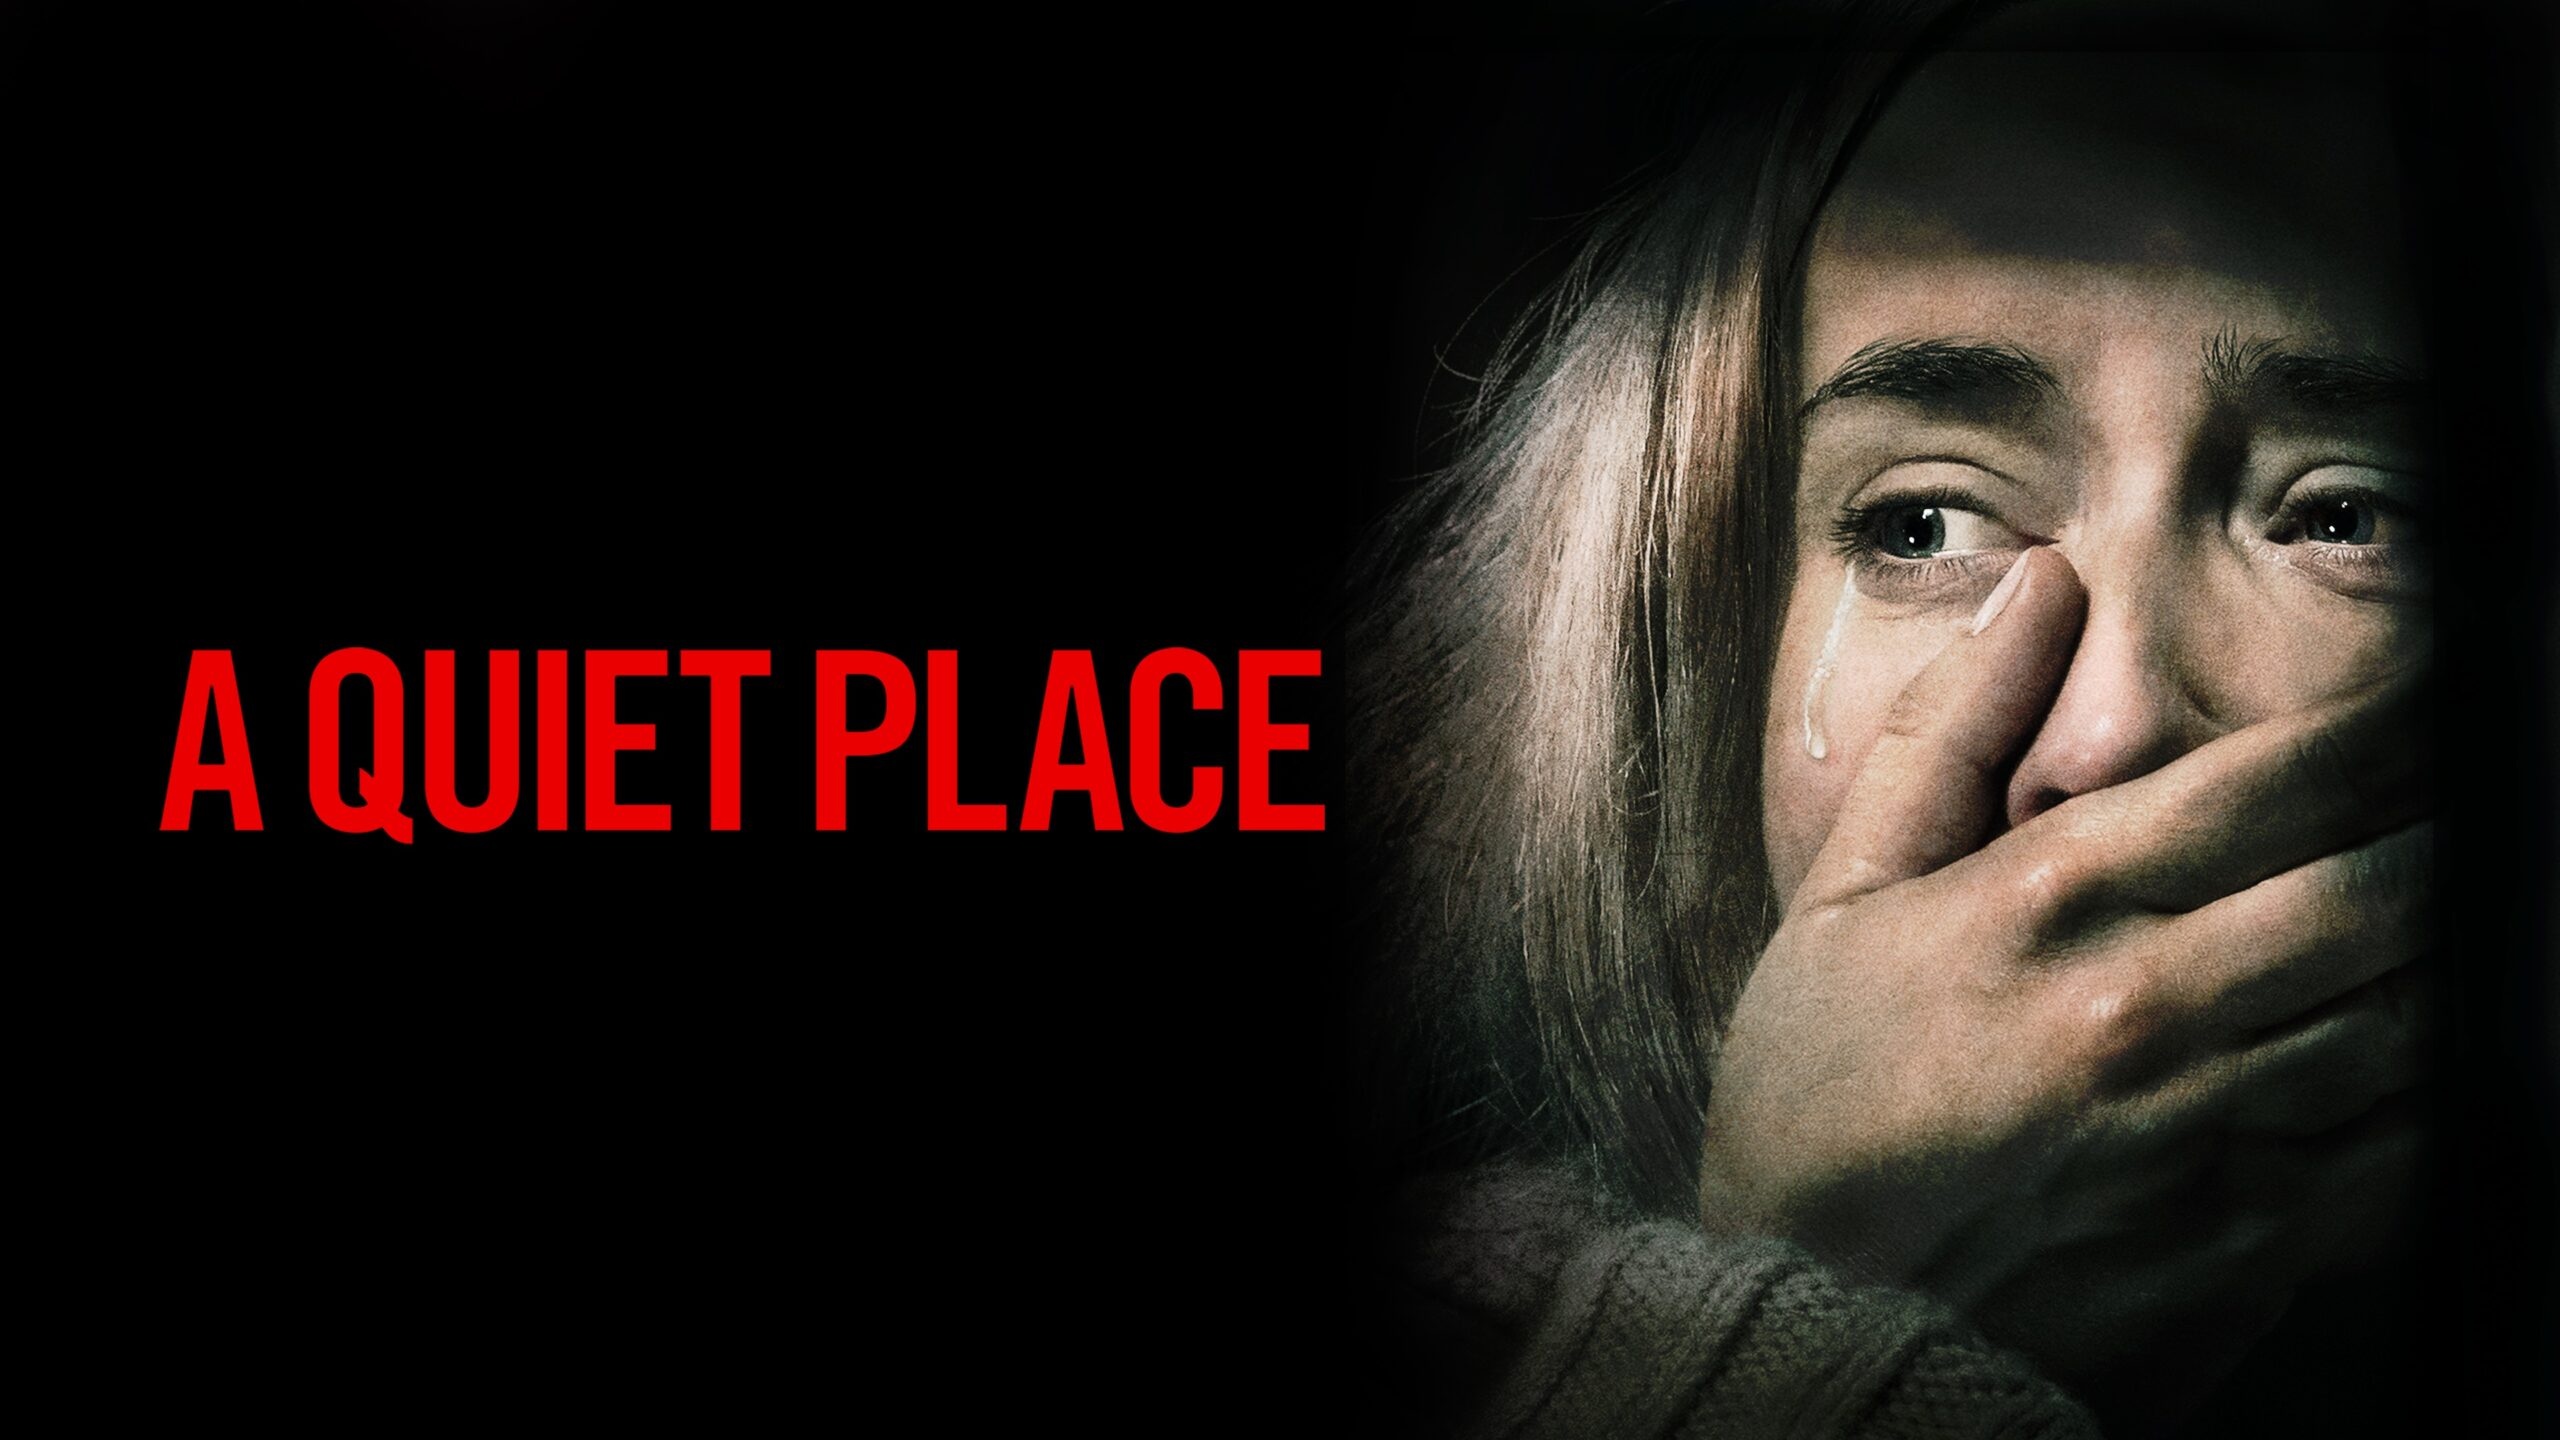 A Quiet Place, Tension-filled suspense, Family's struggle, Heart-pounding moments, 2560x1440 HD Desktop